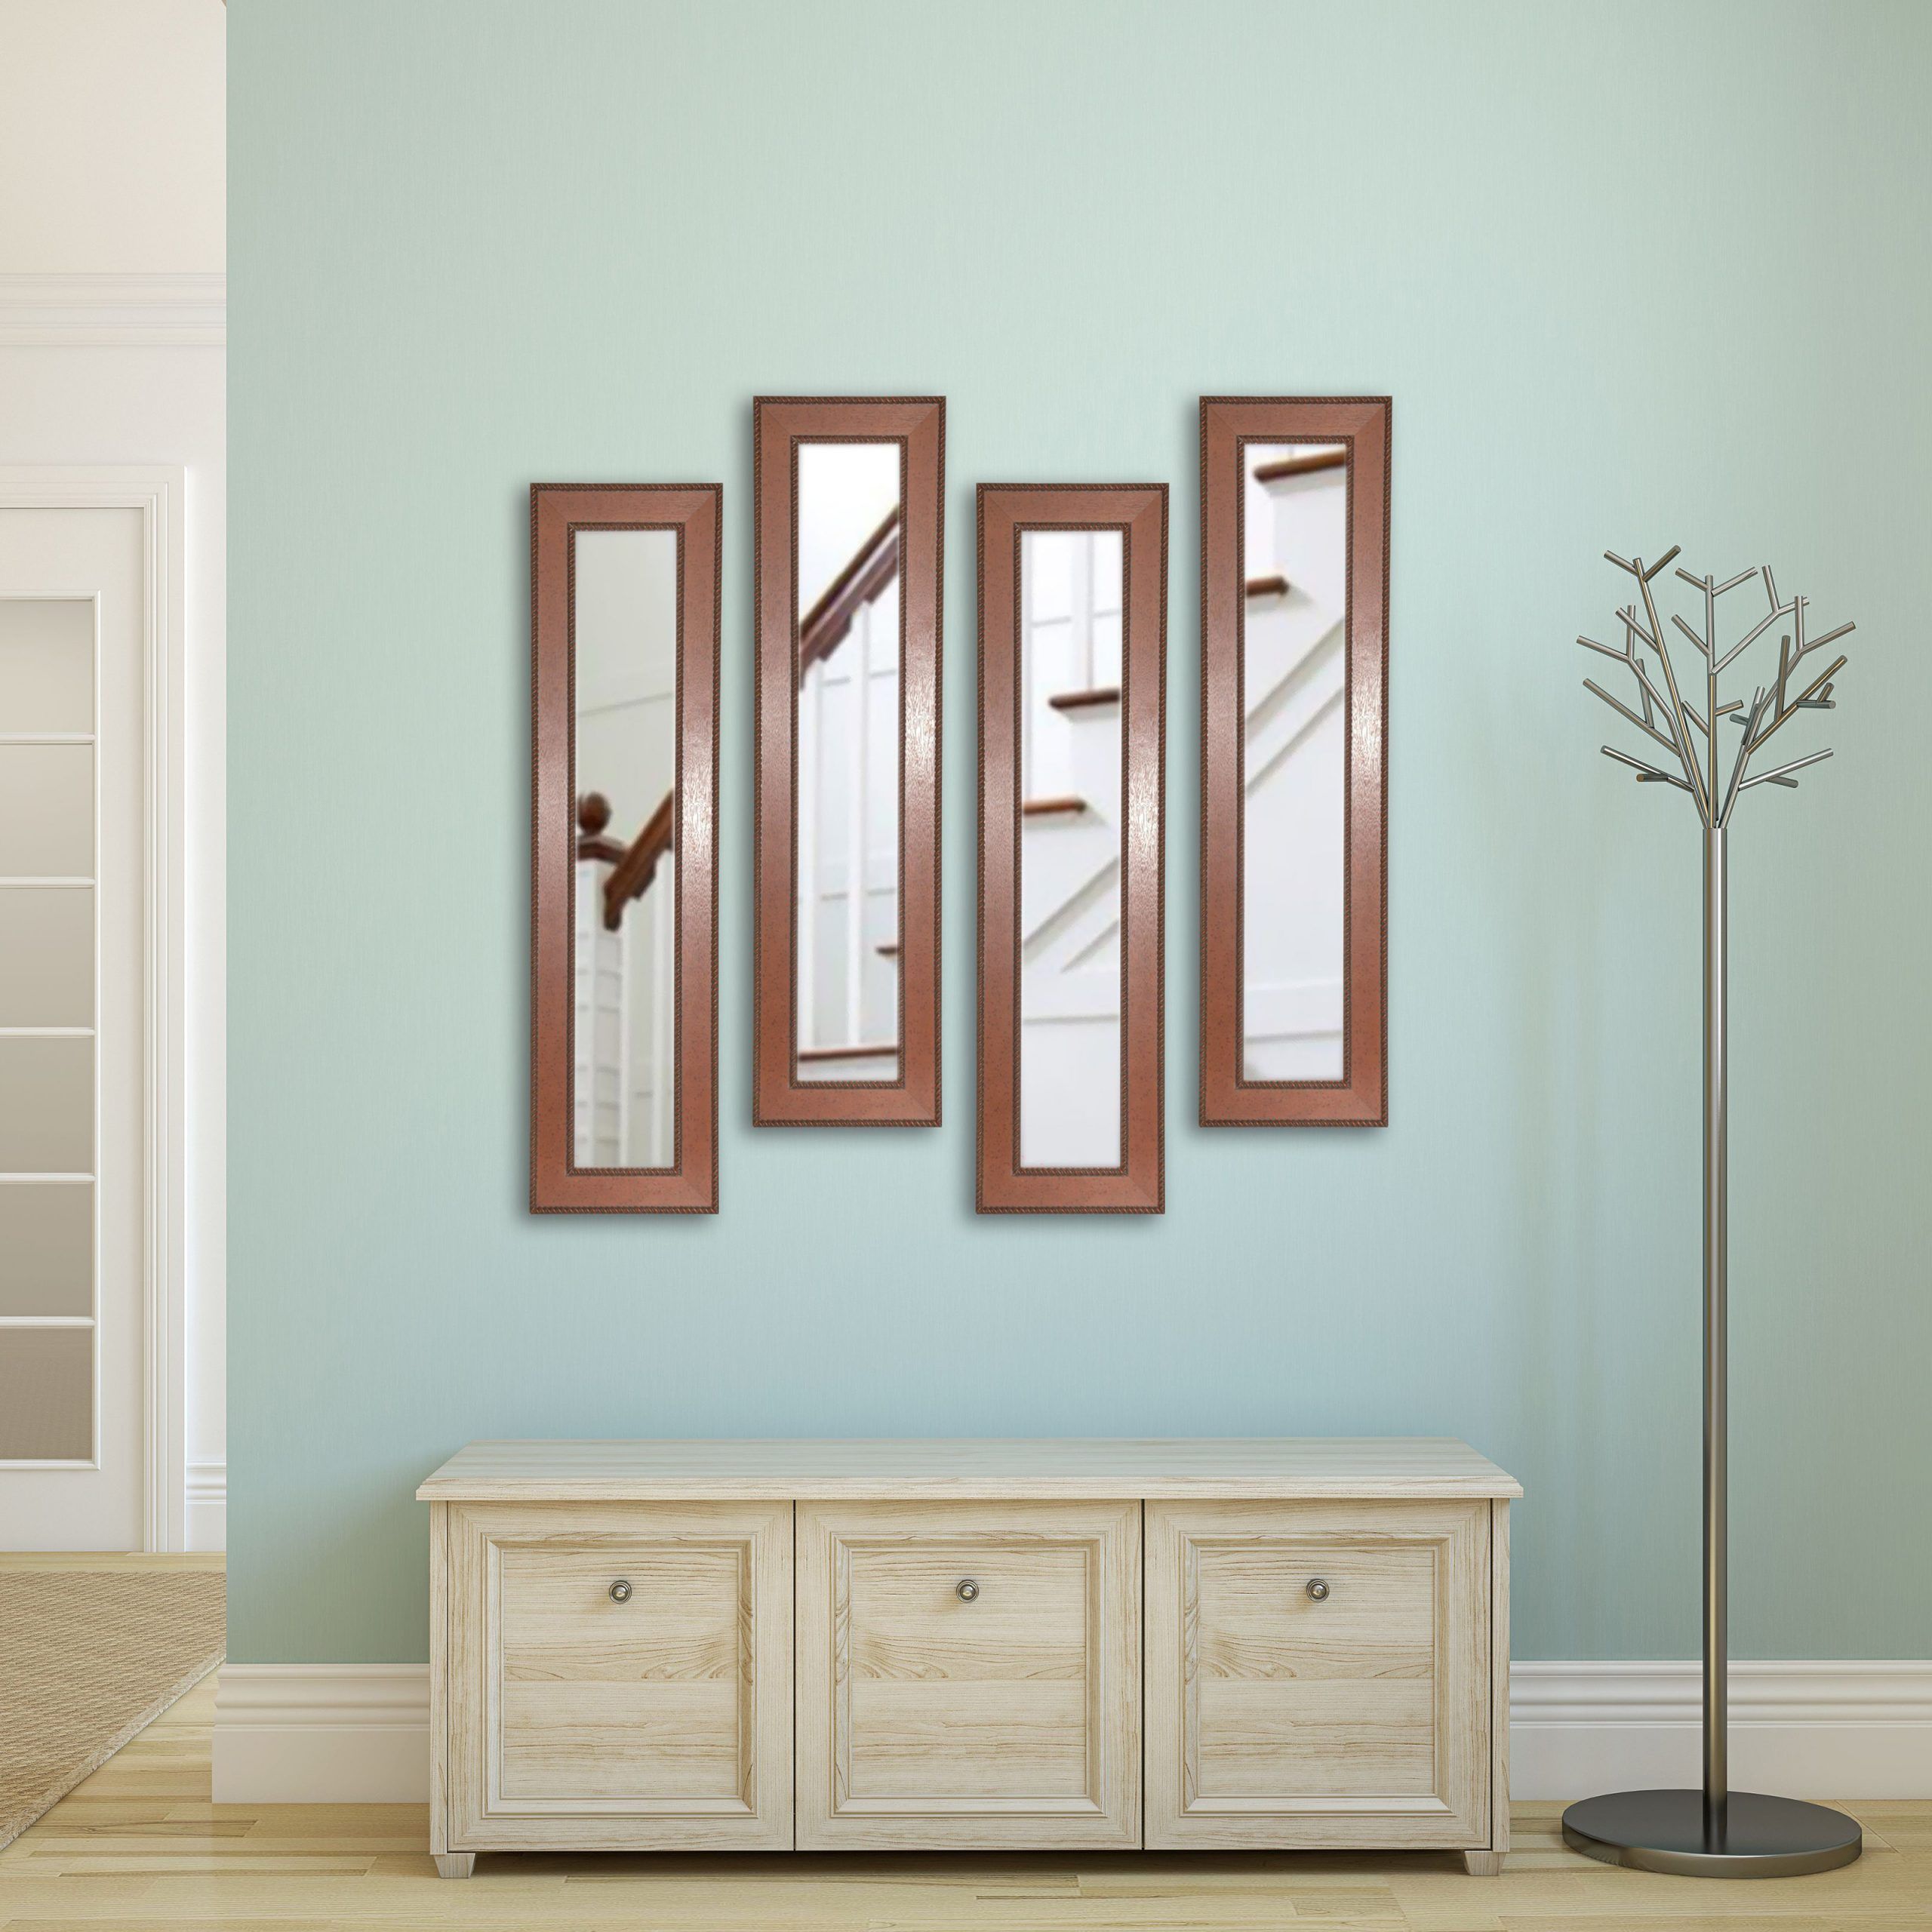 Newest Western Wall Mirrors Throughout Rayne Mirrors Molly Dawn Western Rope Wall Mirror – Mirrors At Hayneedle (View 12 of 15)